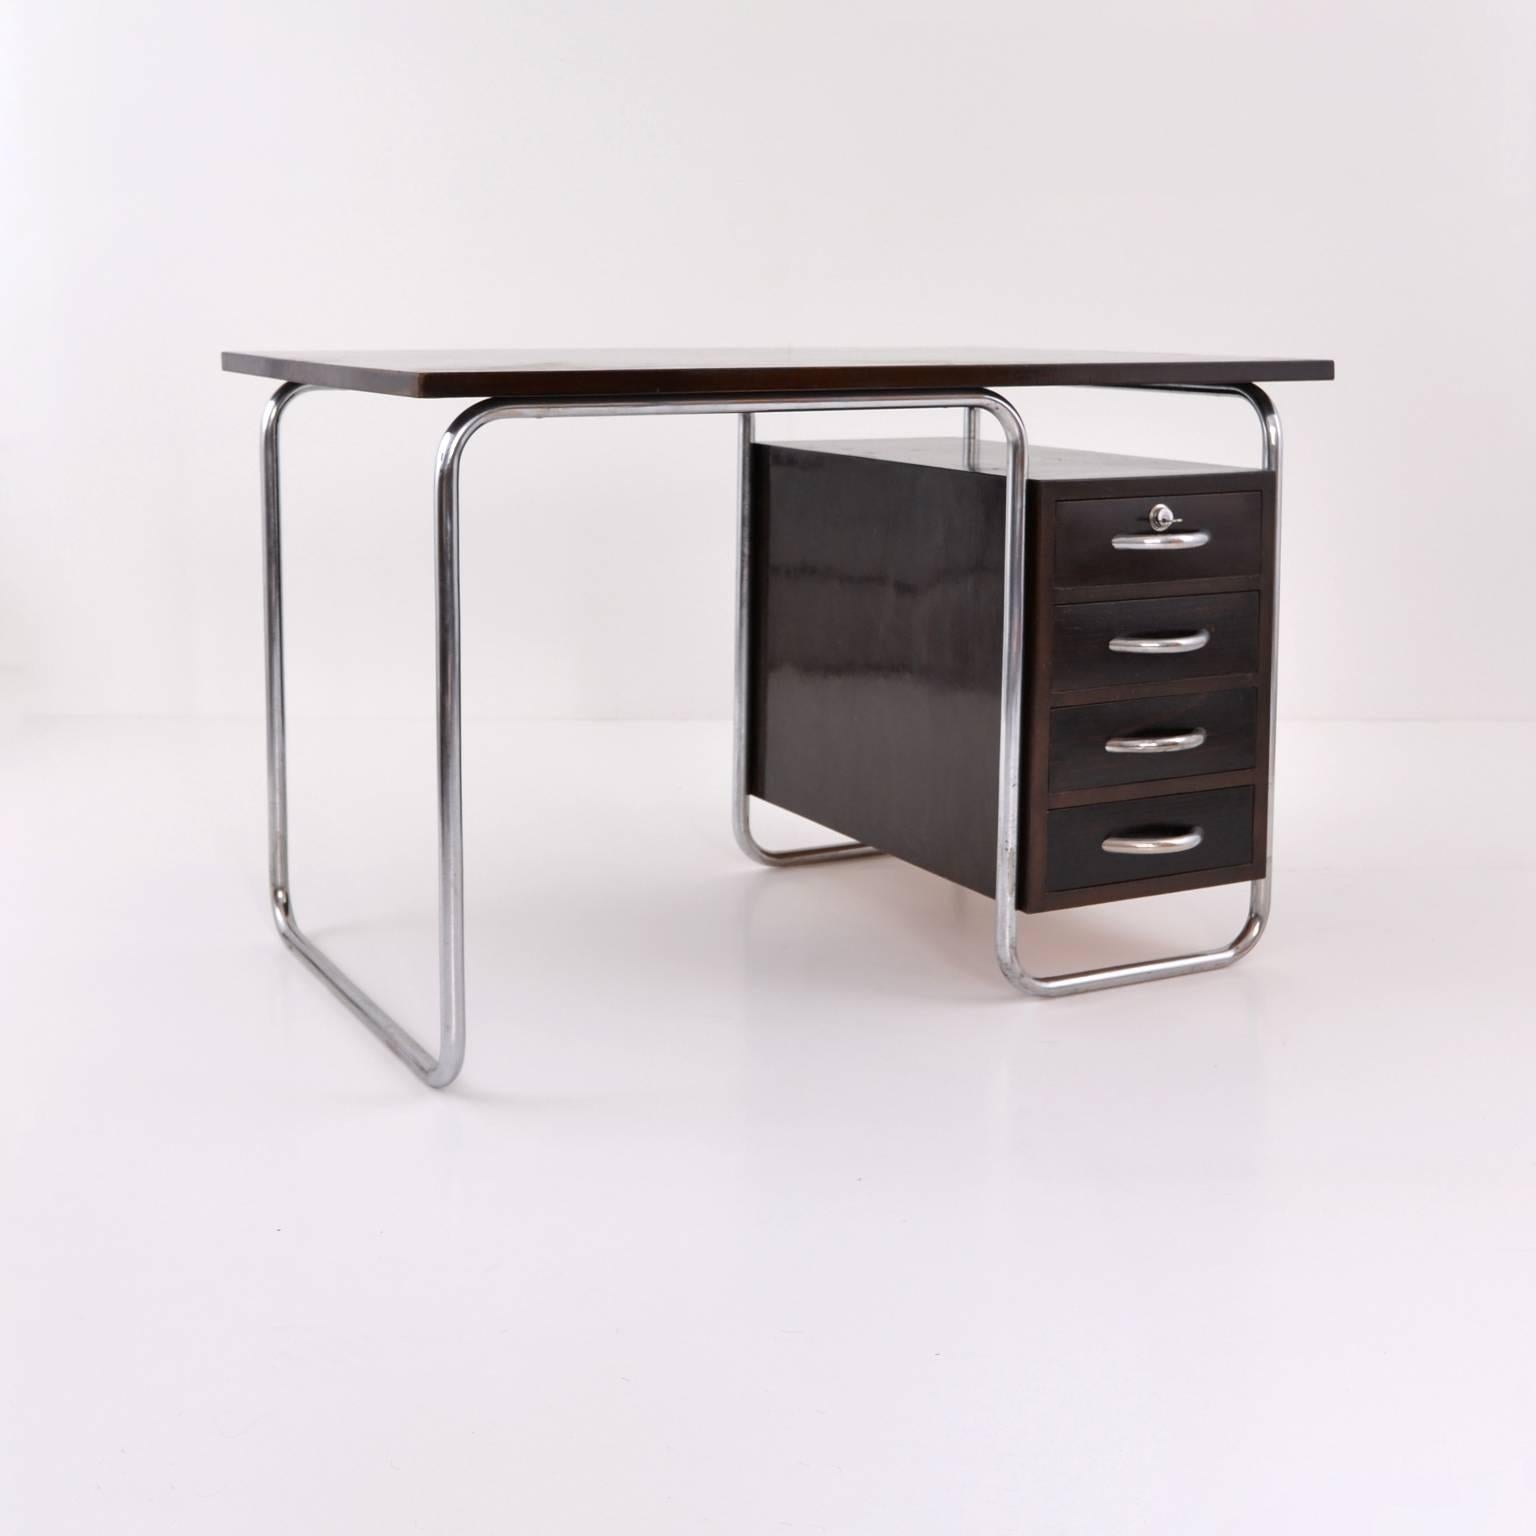 Modernist tubular steel and stained wood desk in the new objectivity style (Neue Sachlichkeit), designed and produced by Rudolf Vichr, Prague, circa 1930.